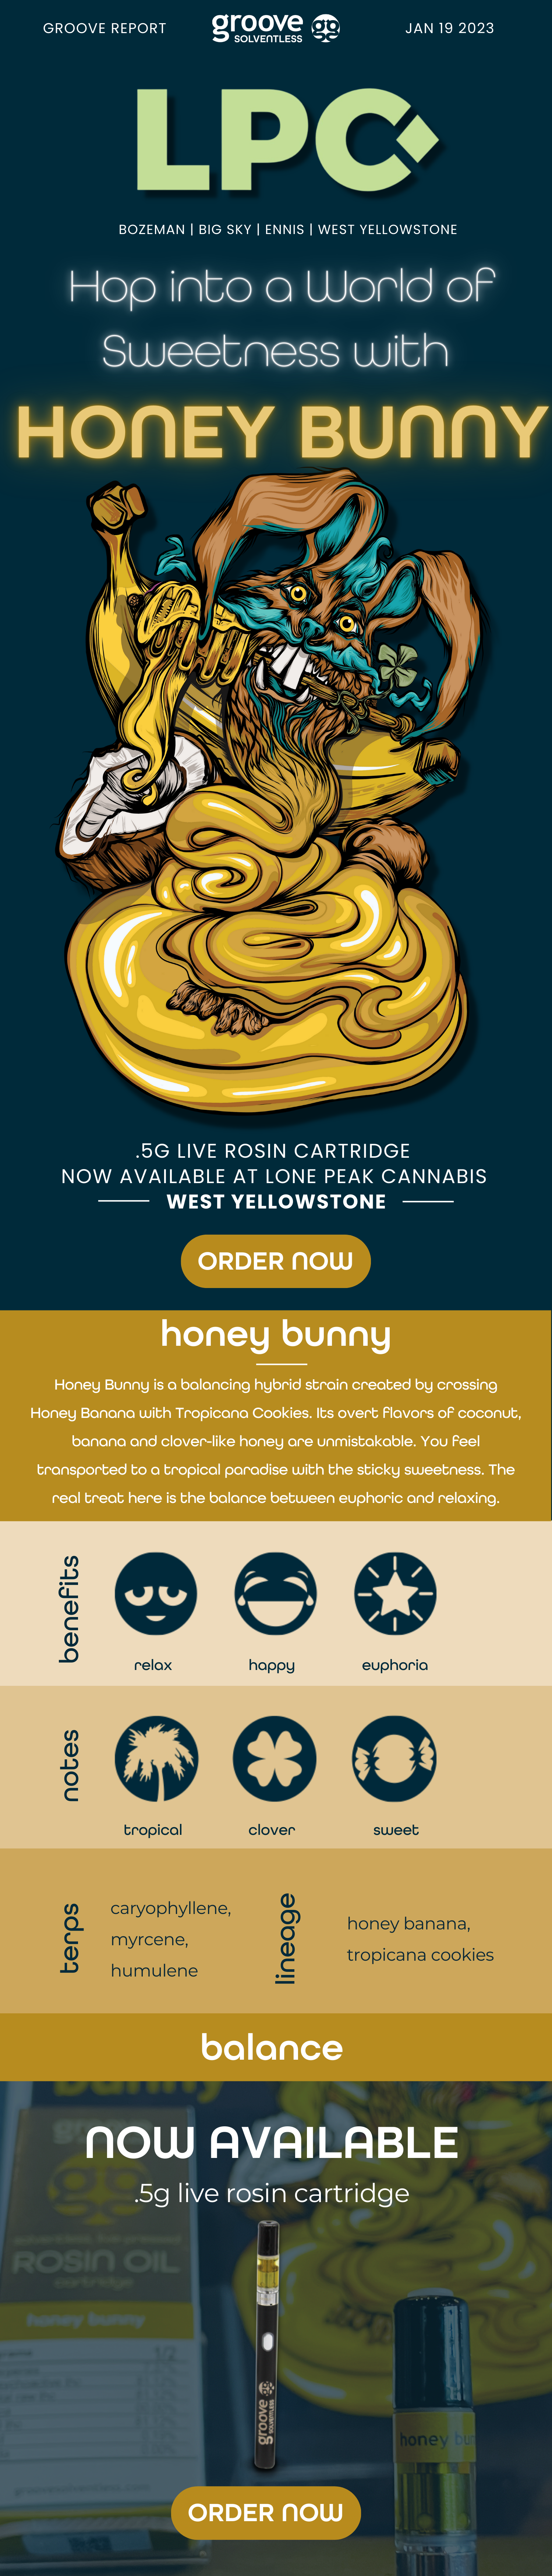 Honey Bunny Cartridge Now Available at Lone Peak West Yellowstone